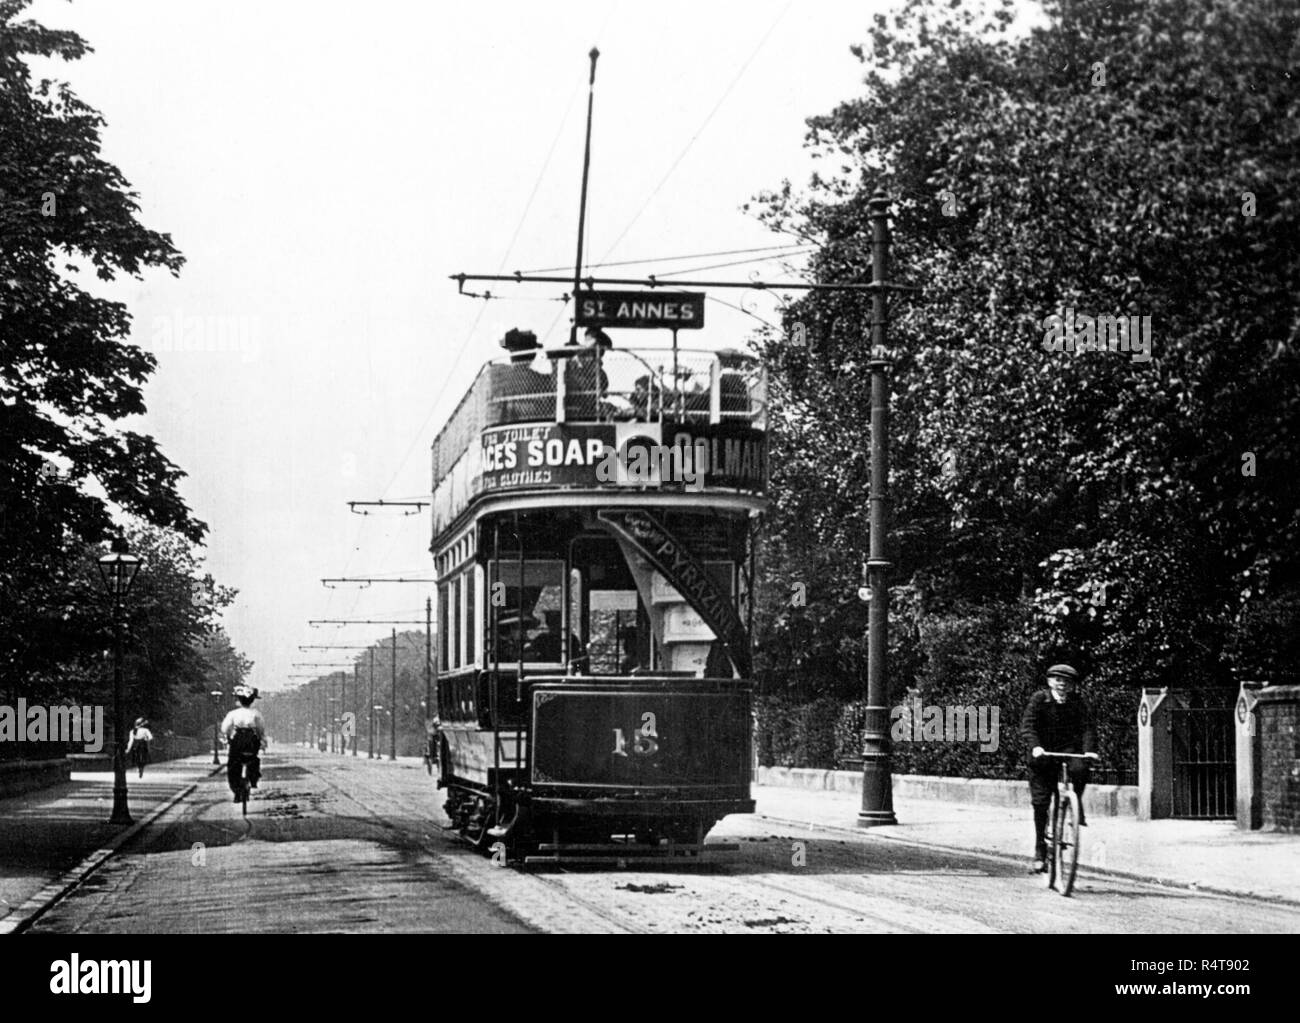 Tram, Lytham St Annes early 1900s Stock Photo